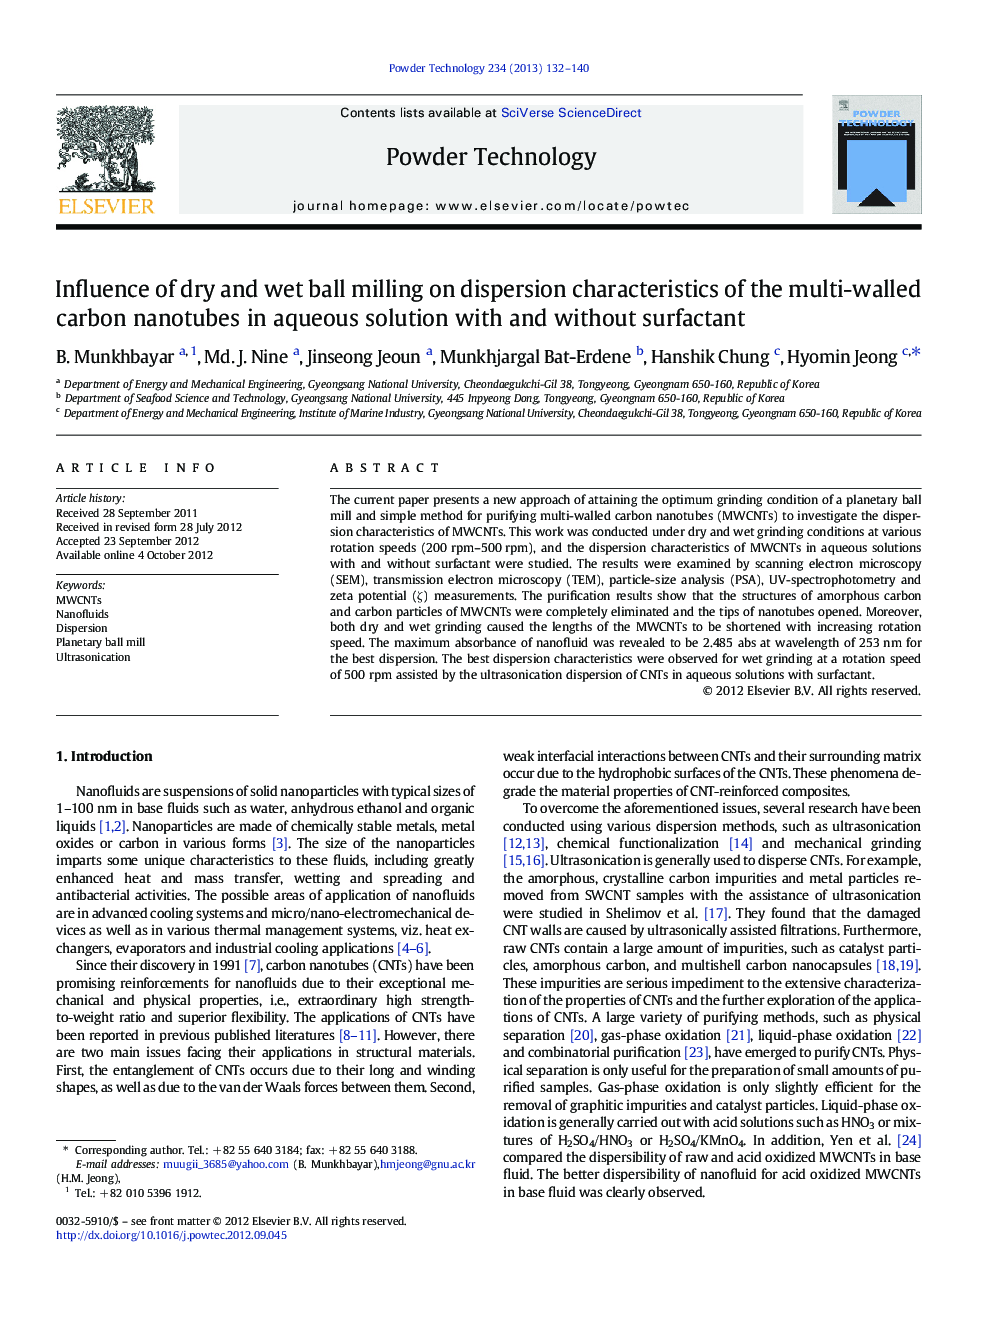 Influence of dry and wet ball milling on dispersion characteristics of the multi-walled carbon nanotubes in aqueous solution with and without surfactant